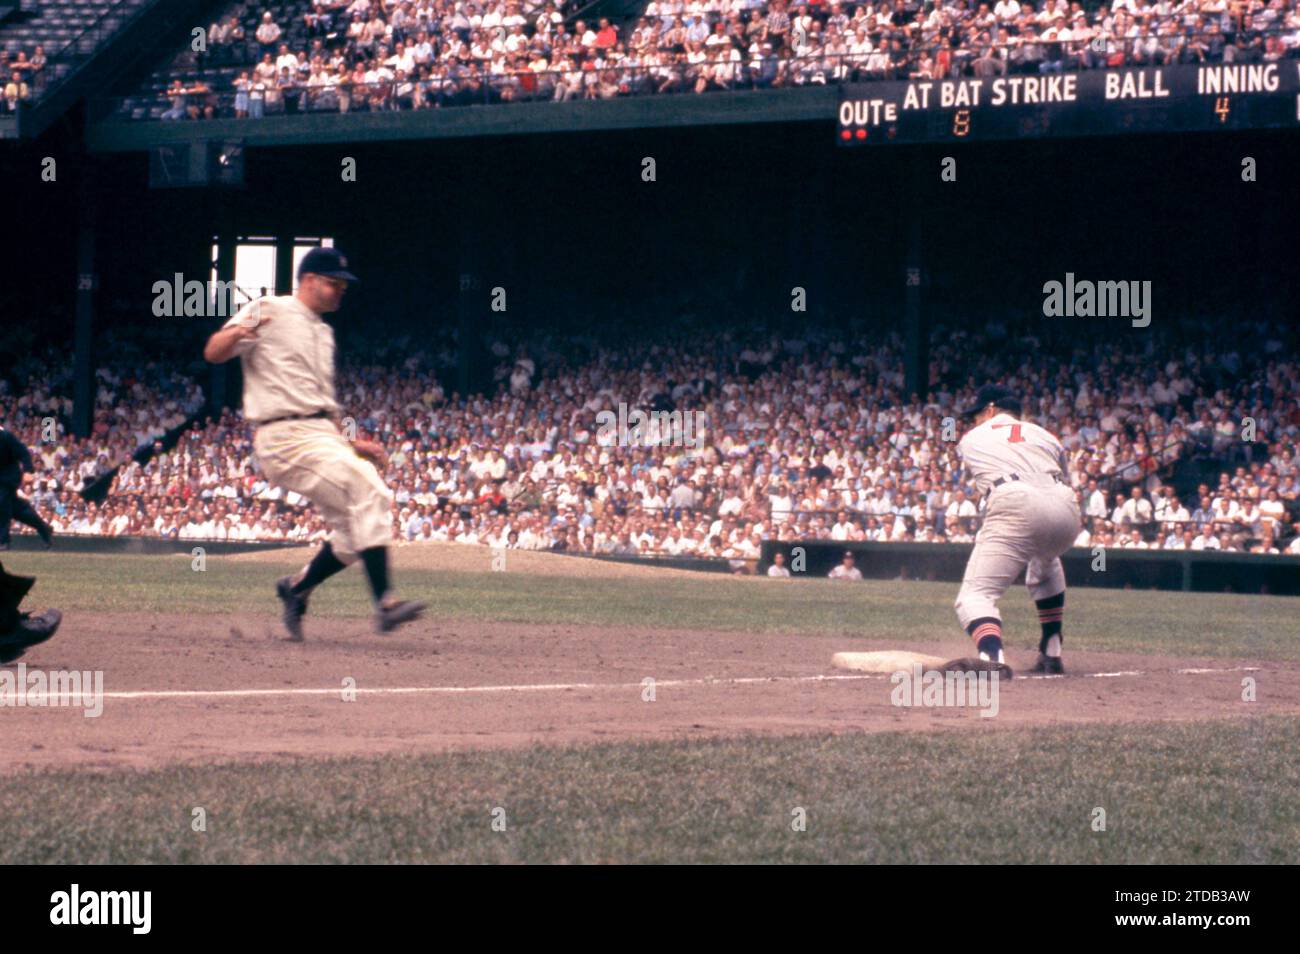 DETROIT, MI - JULY 5: Third baseman Granny Hamner #7 of the Cleveland Indians waits for the throw as Bobo Osborne #32 of the Detroit Tigers goes for third base during an MLB game on July 5, 1959 at Briggs Stadium in Detroit, Michigan. (Photo by Hy Peskin) *** Local Caption *** Granny Hamner;Bobo Osborne Stock Photo